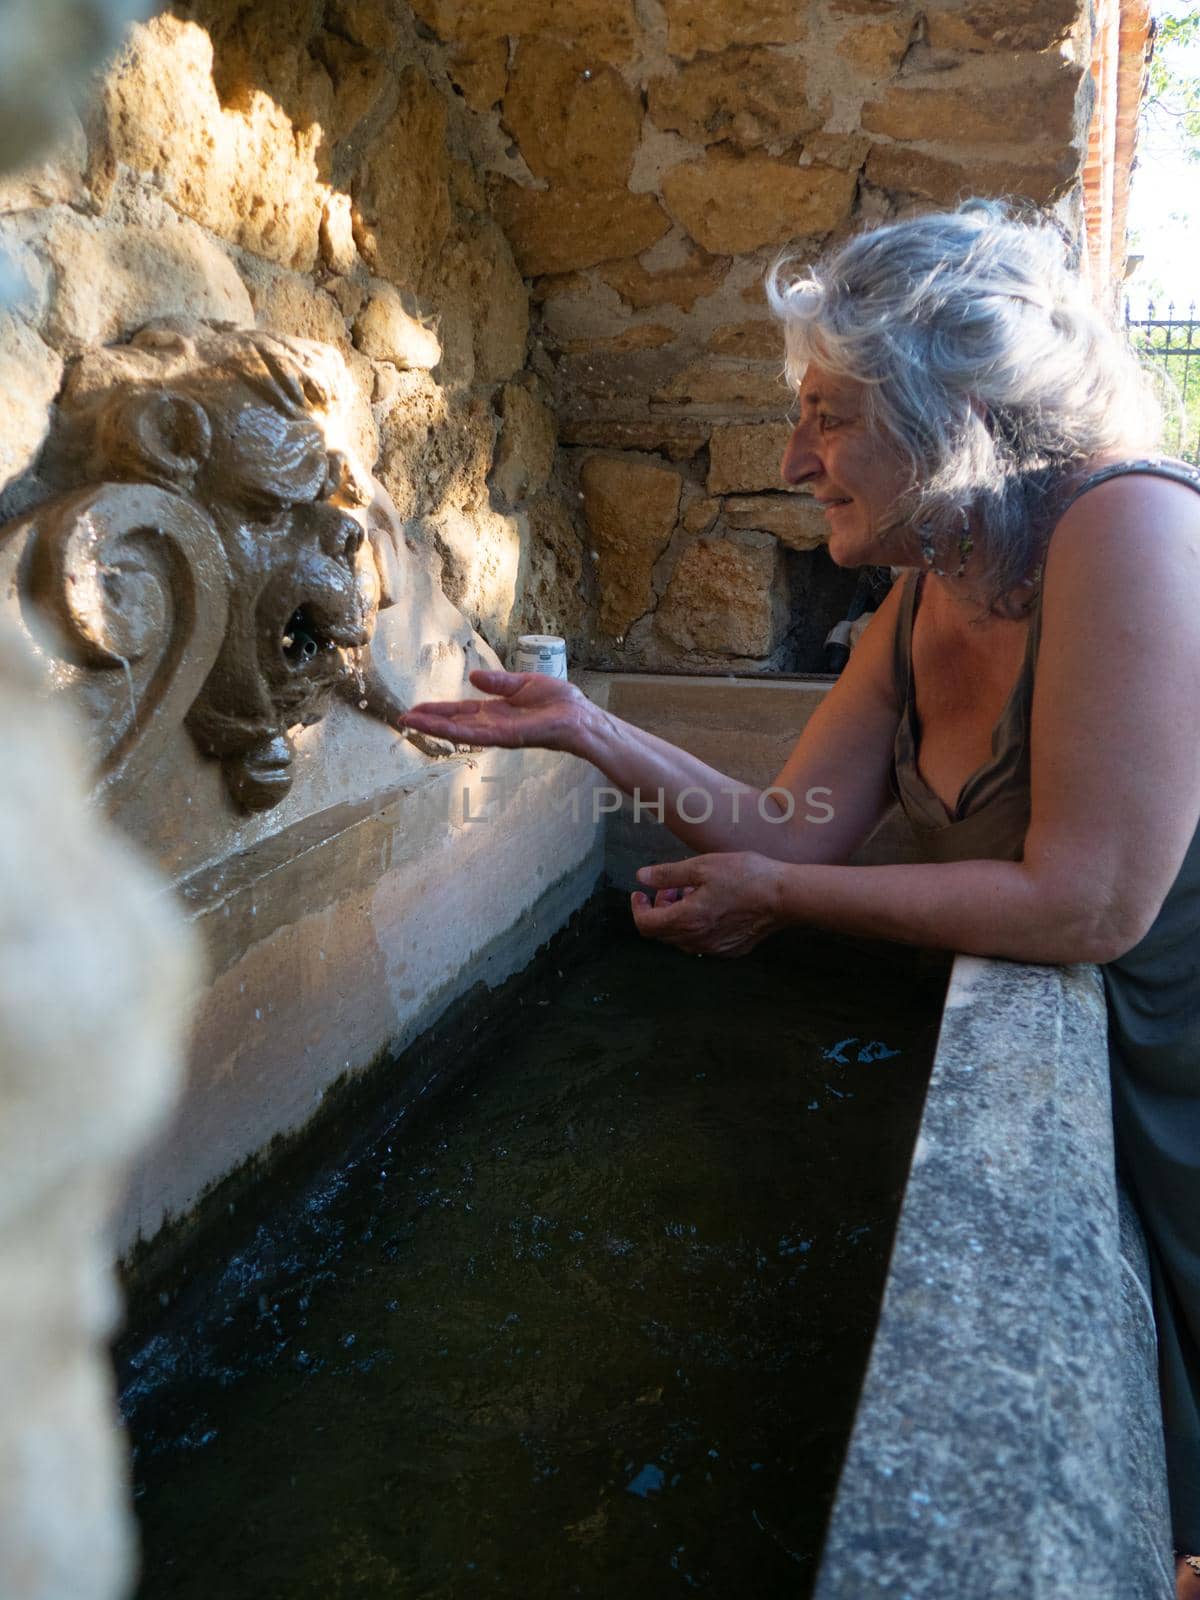 Woman watering and washing on a public foutain in Castell'Arquato Italy.Pure and precious to nature. Shot of hands held out to catch a stream of water outside.